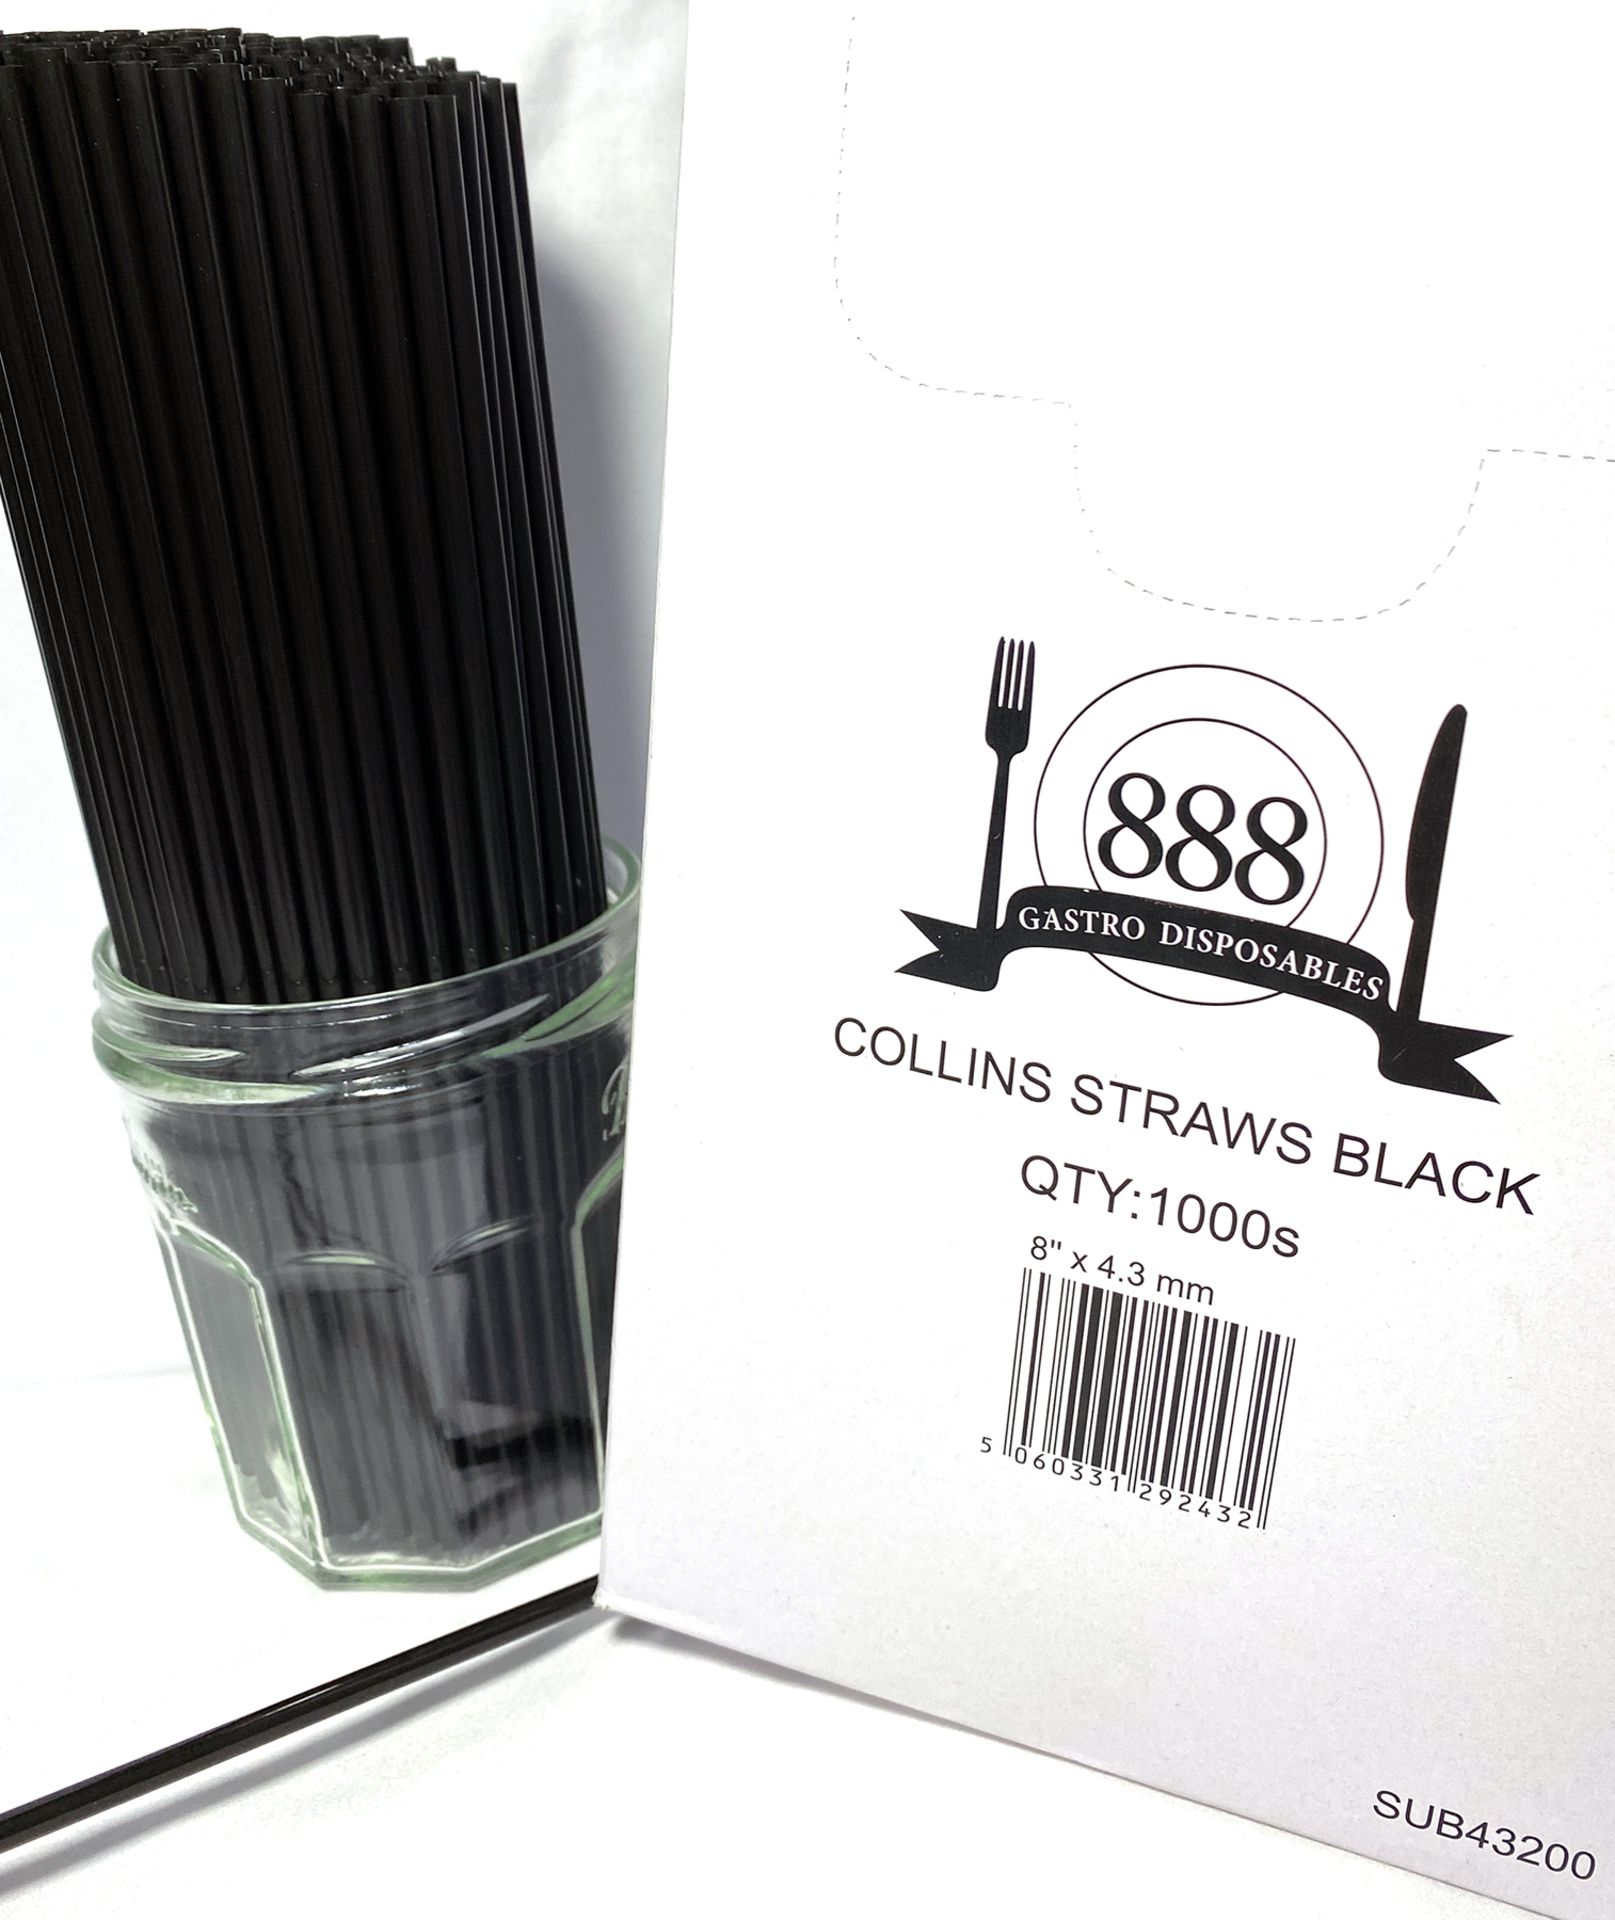 5 x Boxes of Collins Straws by 888 Gastro Disposables